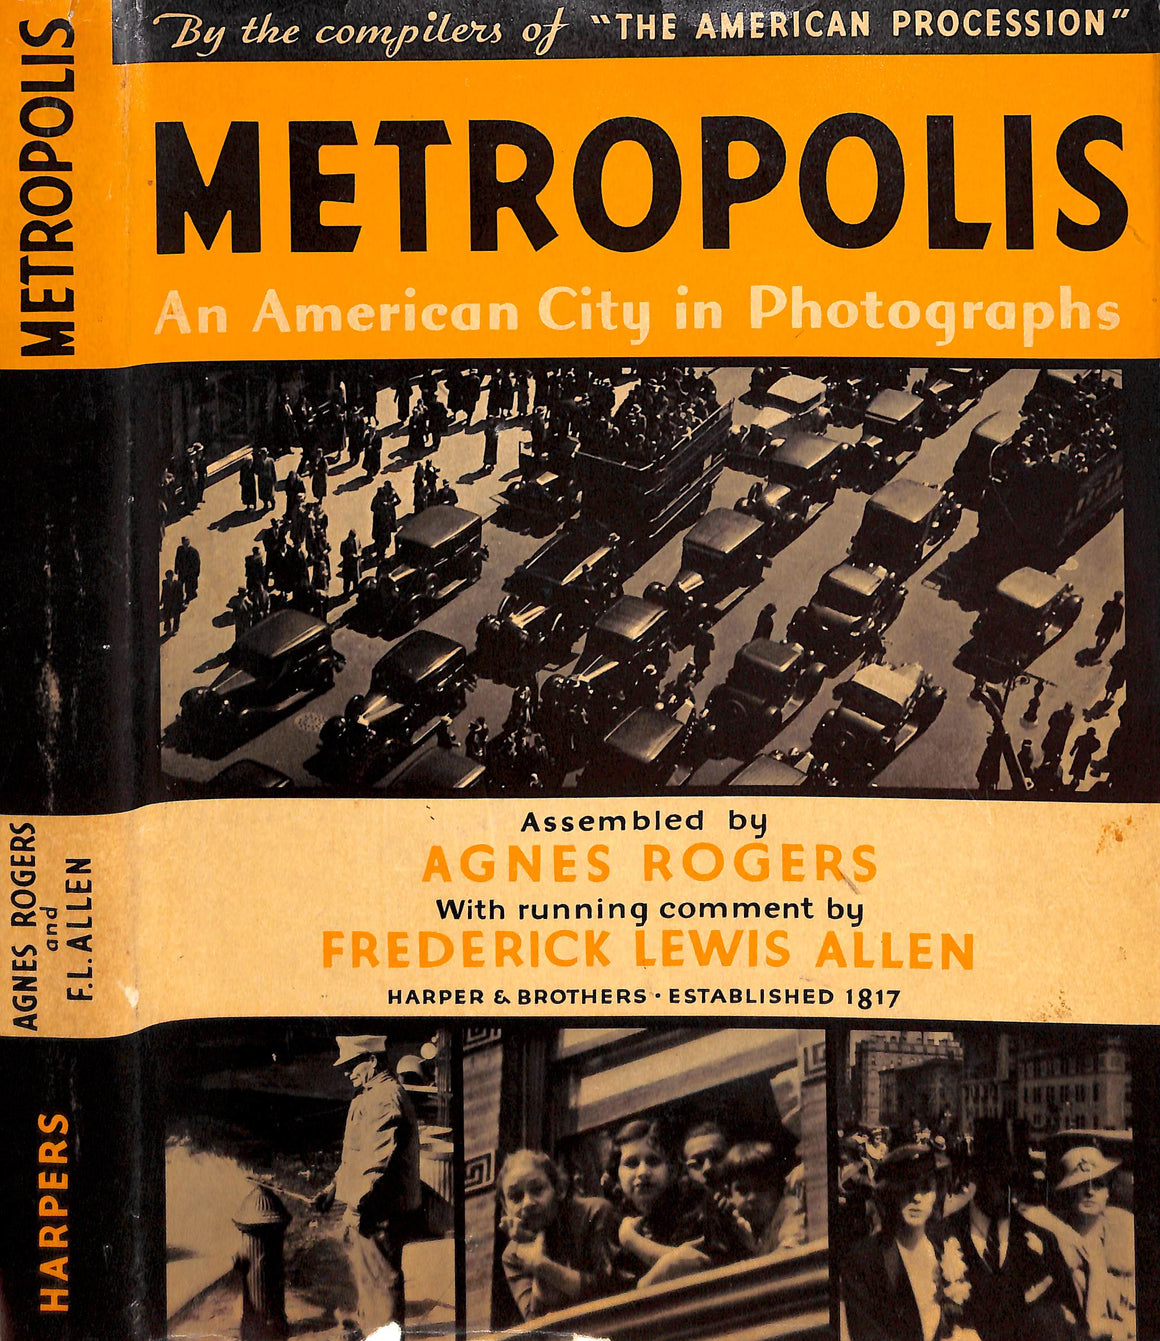 "Metropolis: An American City In Photographs" 1934 ROGERS, Agnes [assembled by]